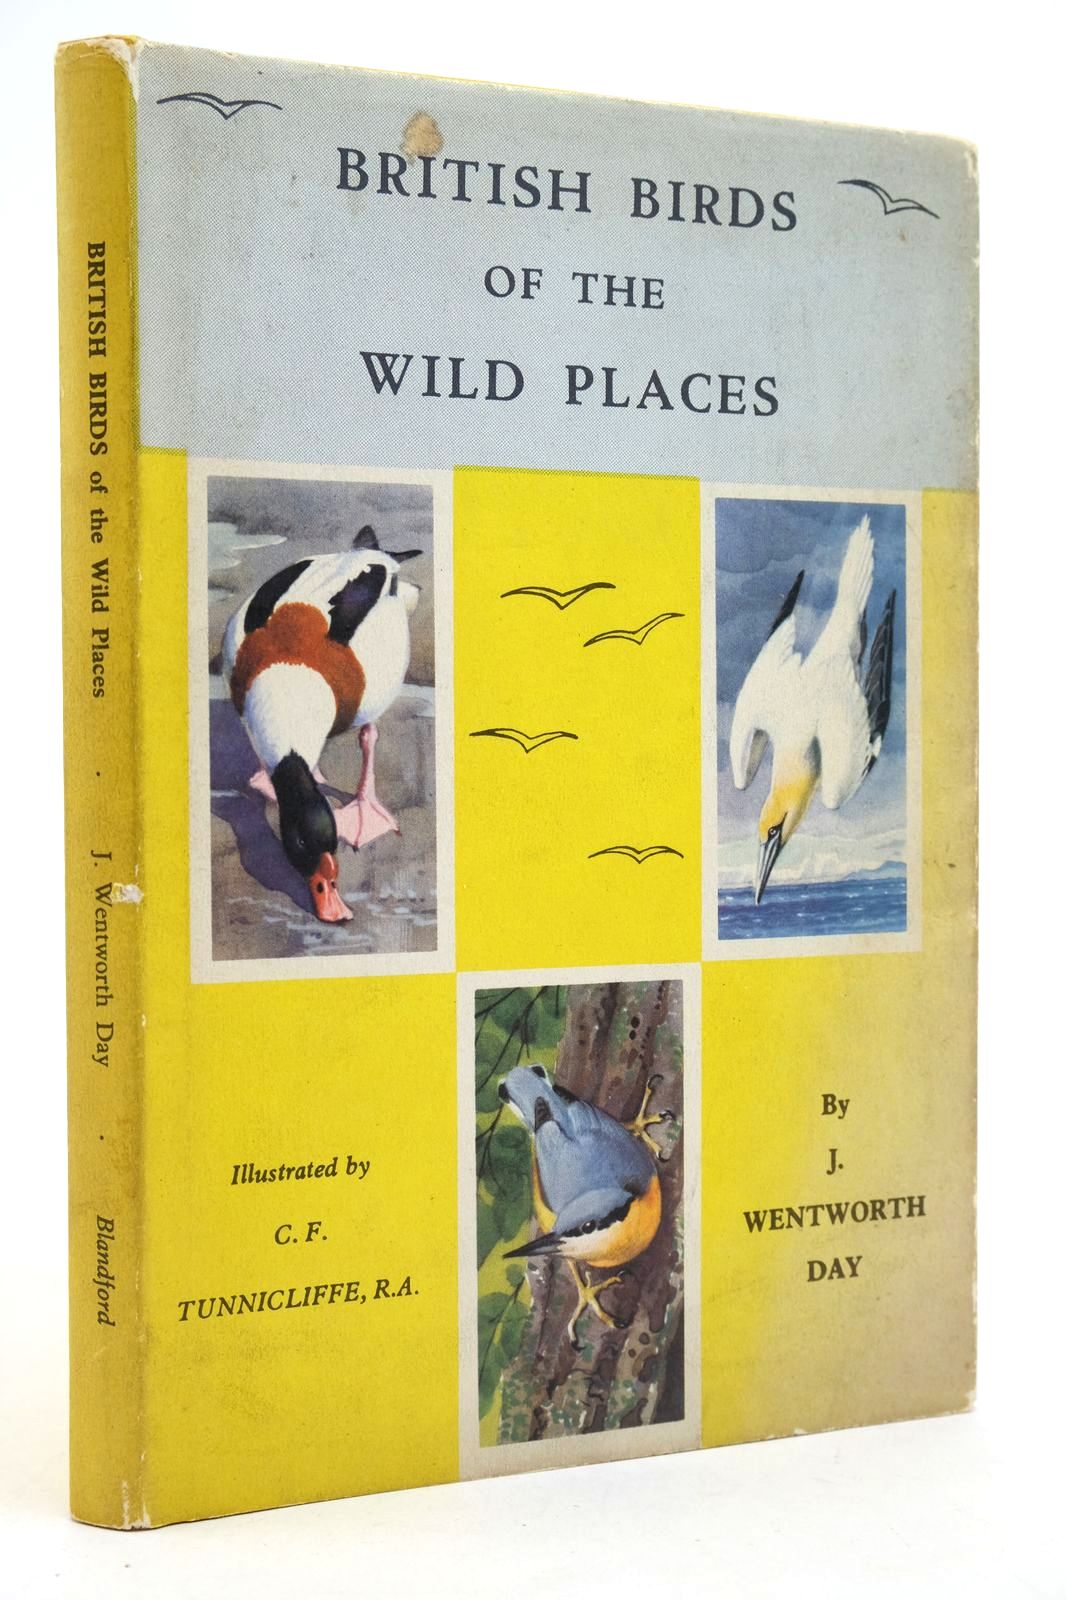 Photo of BRITISH BIRDS OF THE WILD PLACES written by Day, J. Wentworth illustrated by Tunnicliffe, C.F. published by Blandford Press (STOCK CODE: 2140553)  for sale by Stella & Rose's Books